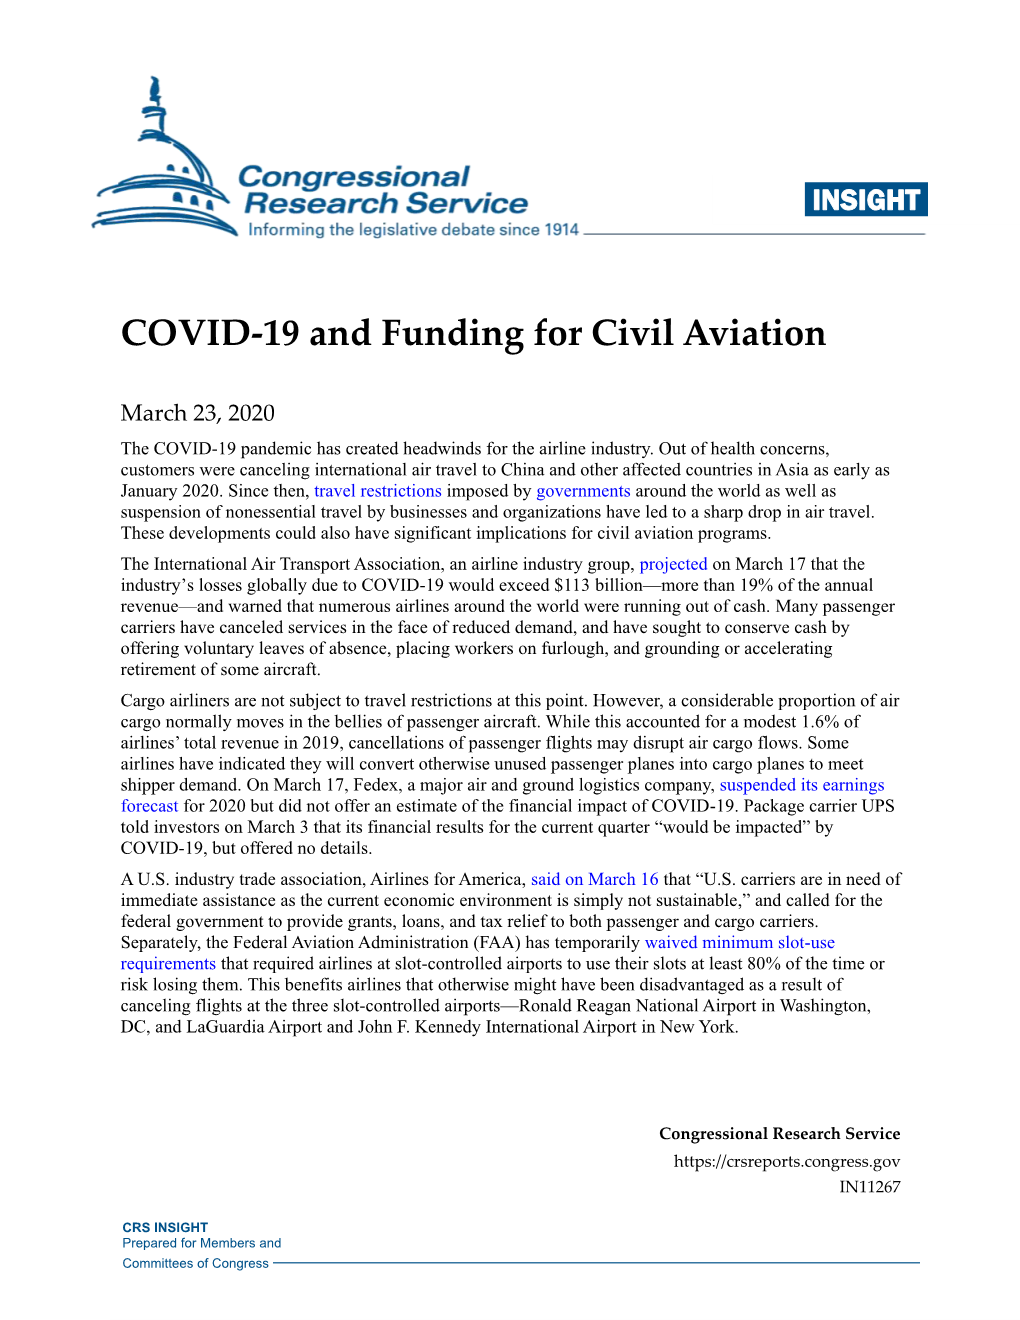 COVID-19 and Funding for Civil Aviation